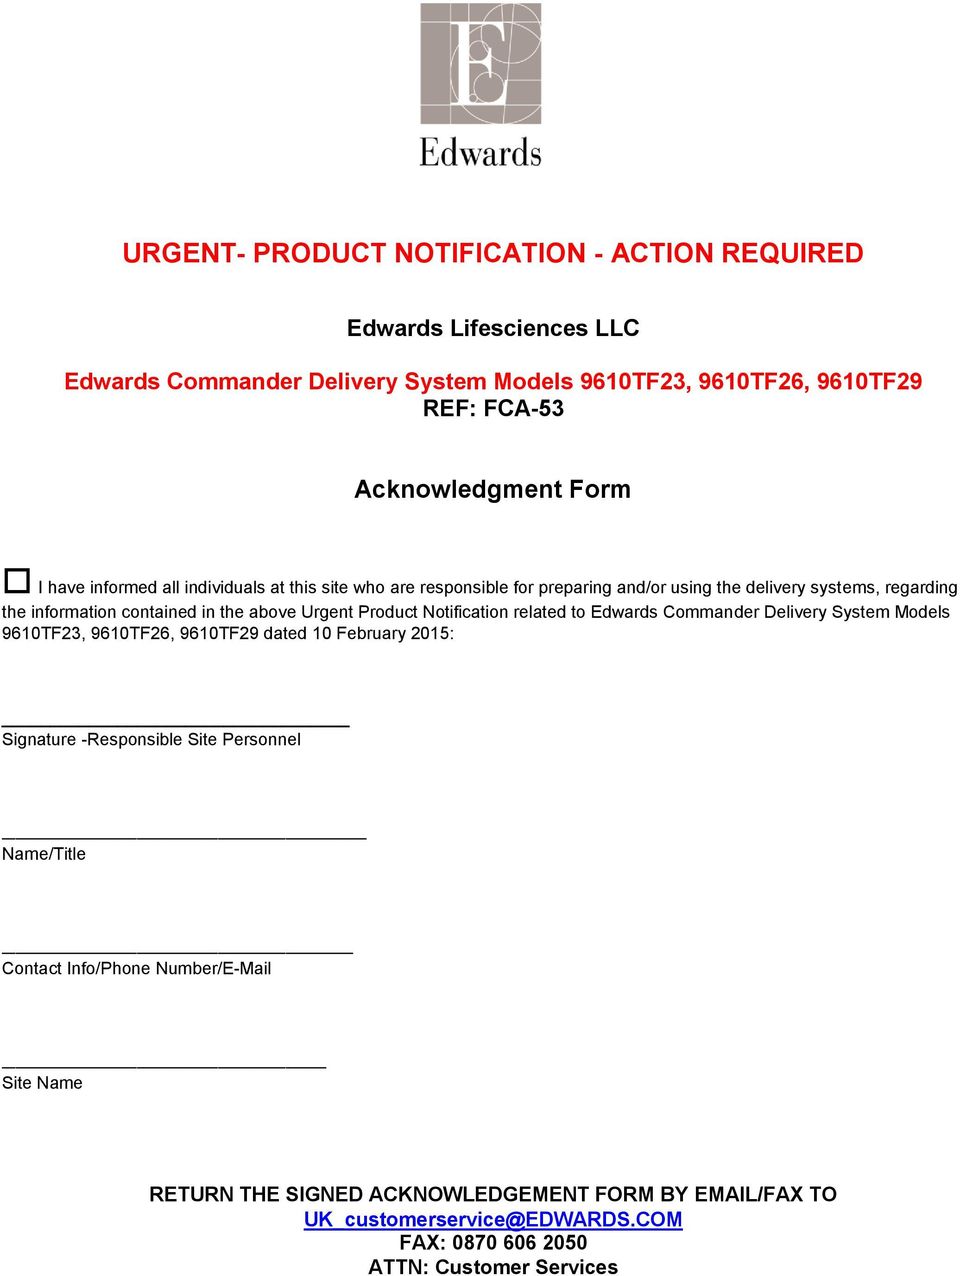 Urgent Product Notification related to Edwards Commander Delivery System Models 9610TF23, 9610TF26, 9610TF29 dated 10 February 2015: Signature -Responsible Site Personnel